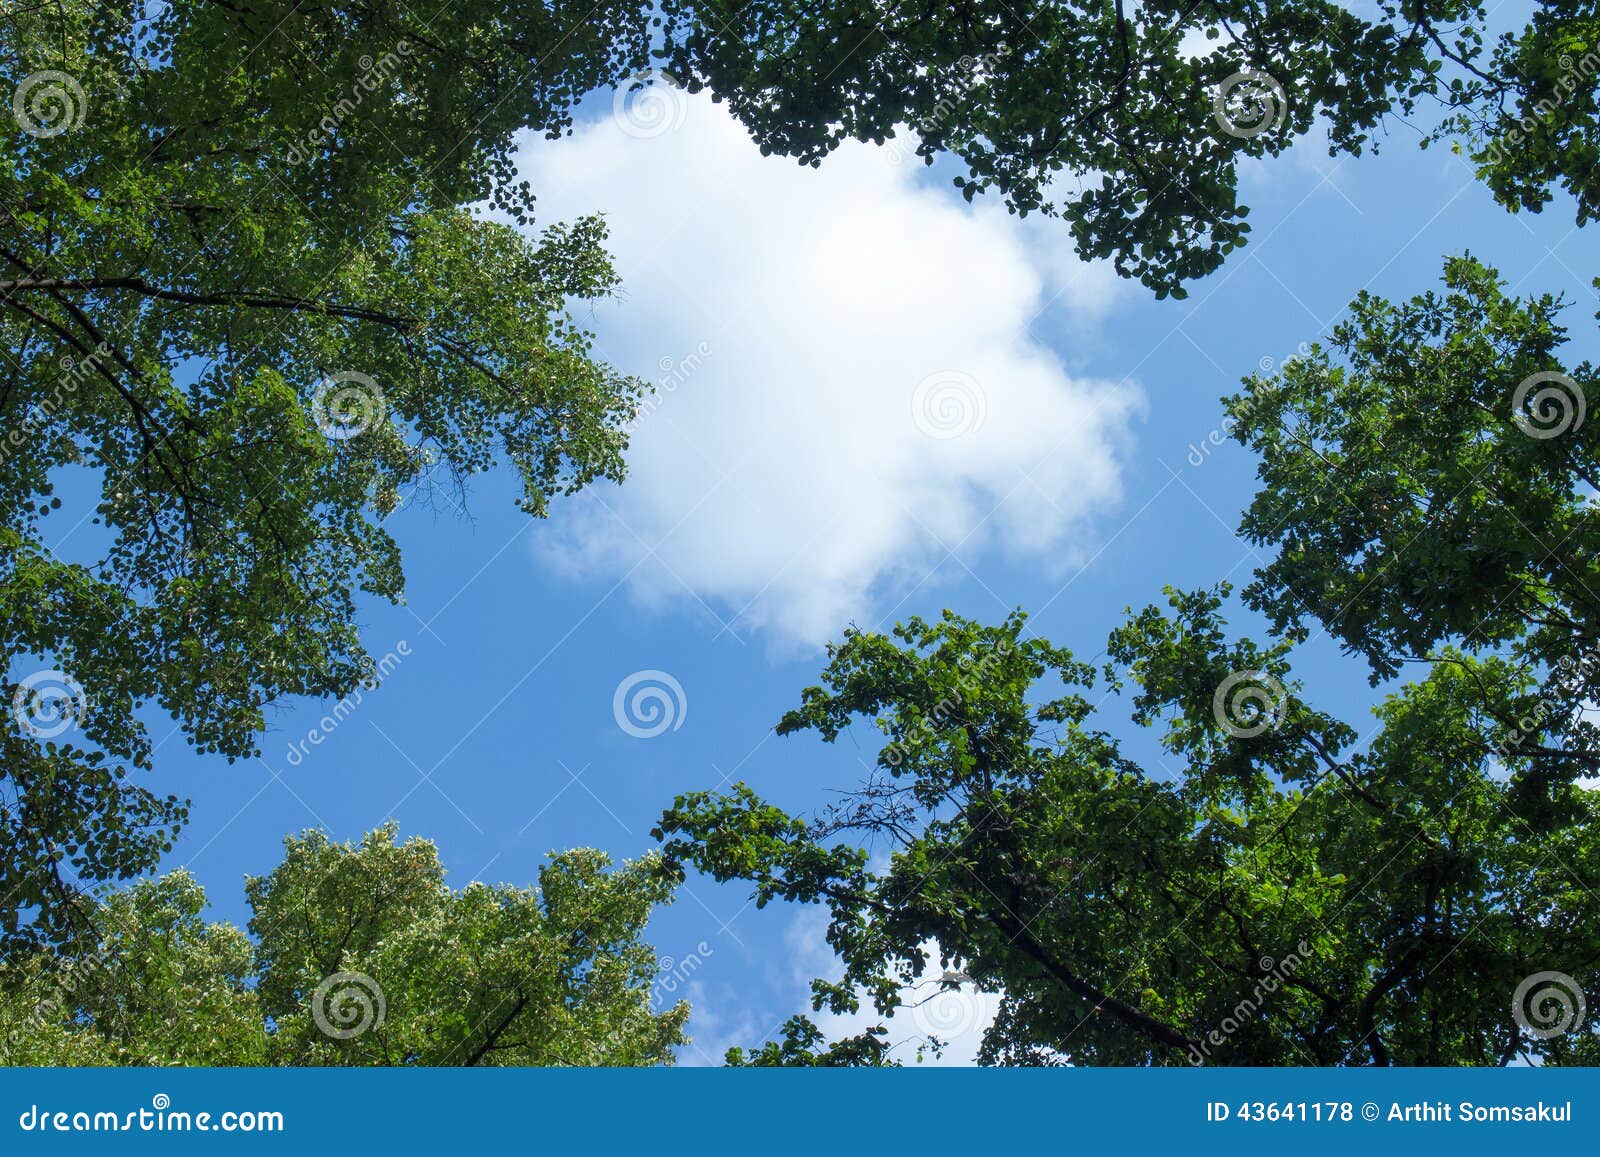 white clouds surrounded by luxuriant trees against sky